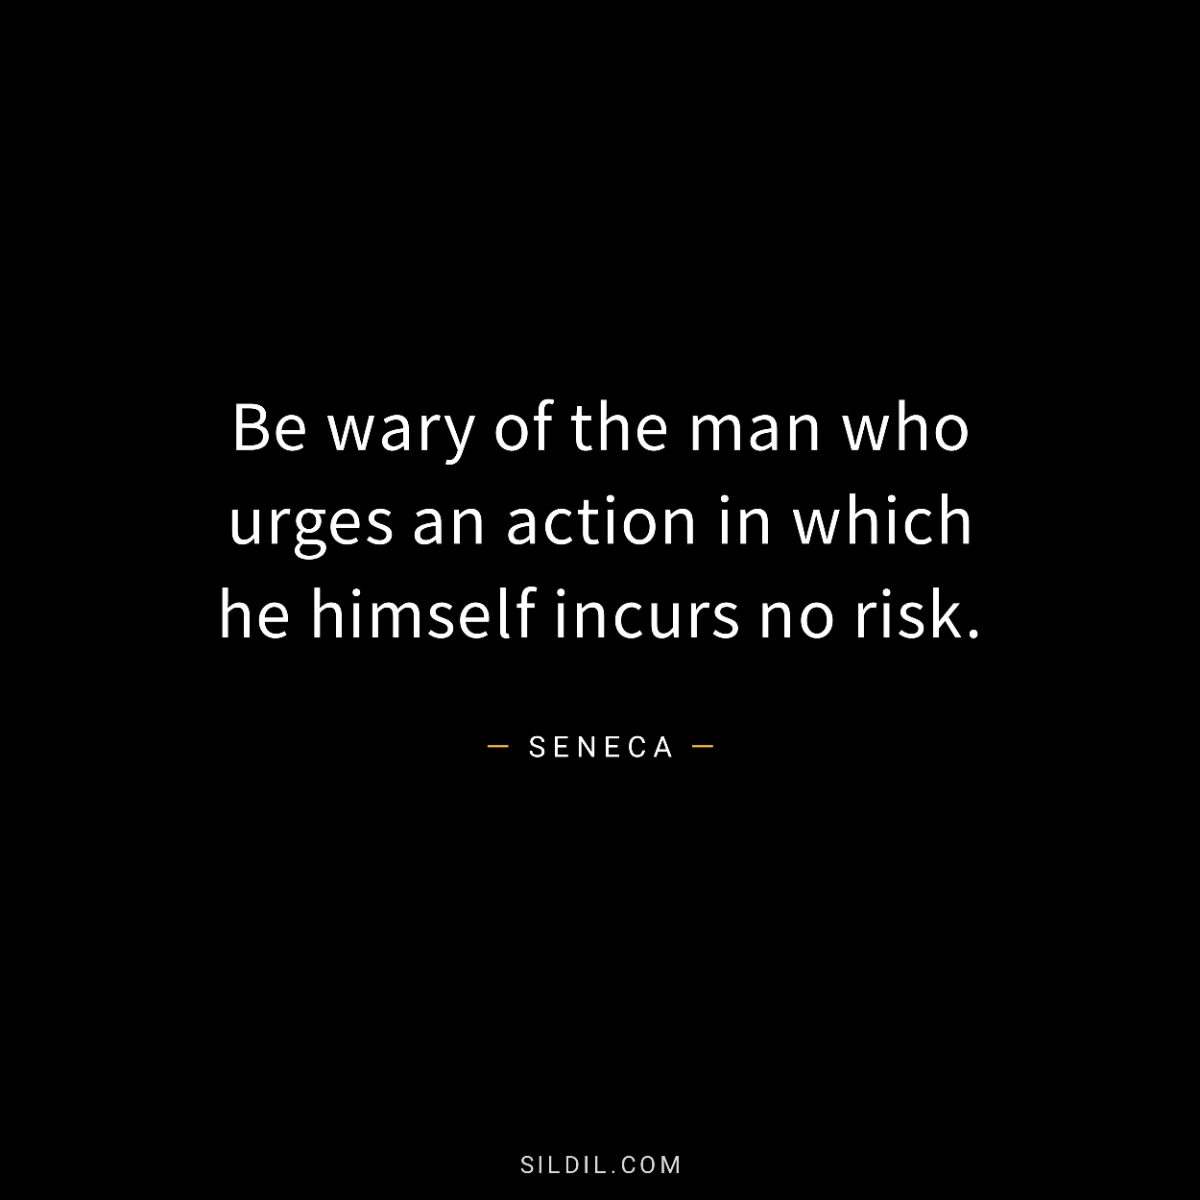 Be wary of the man who urges an action in which he himself incurs no risk.